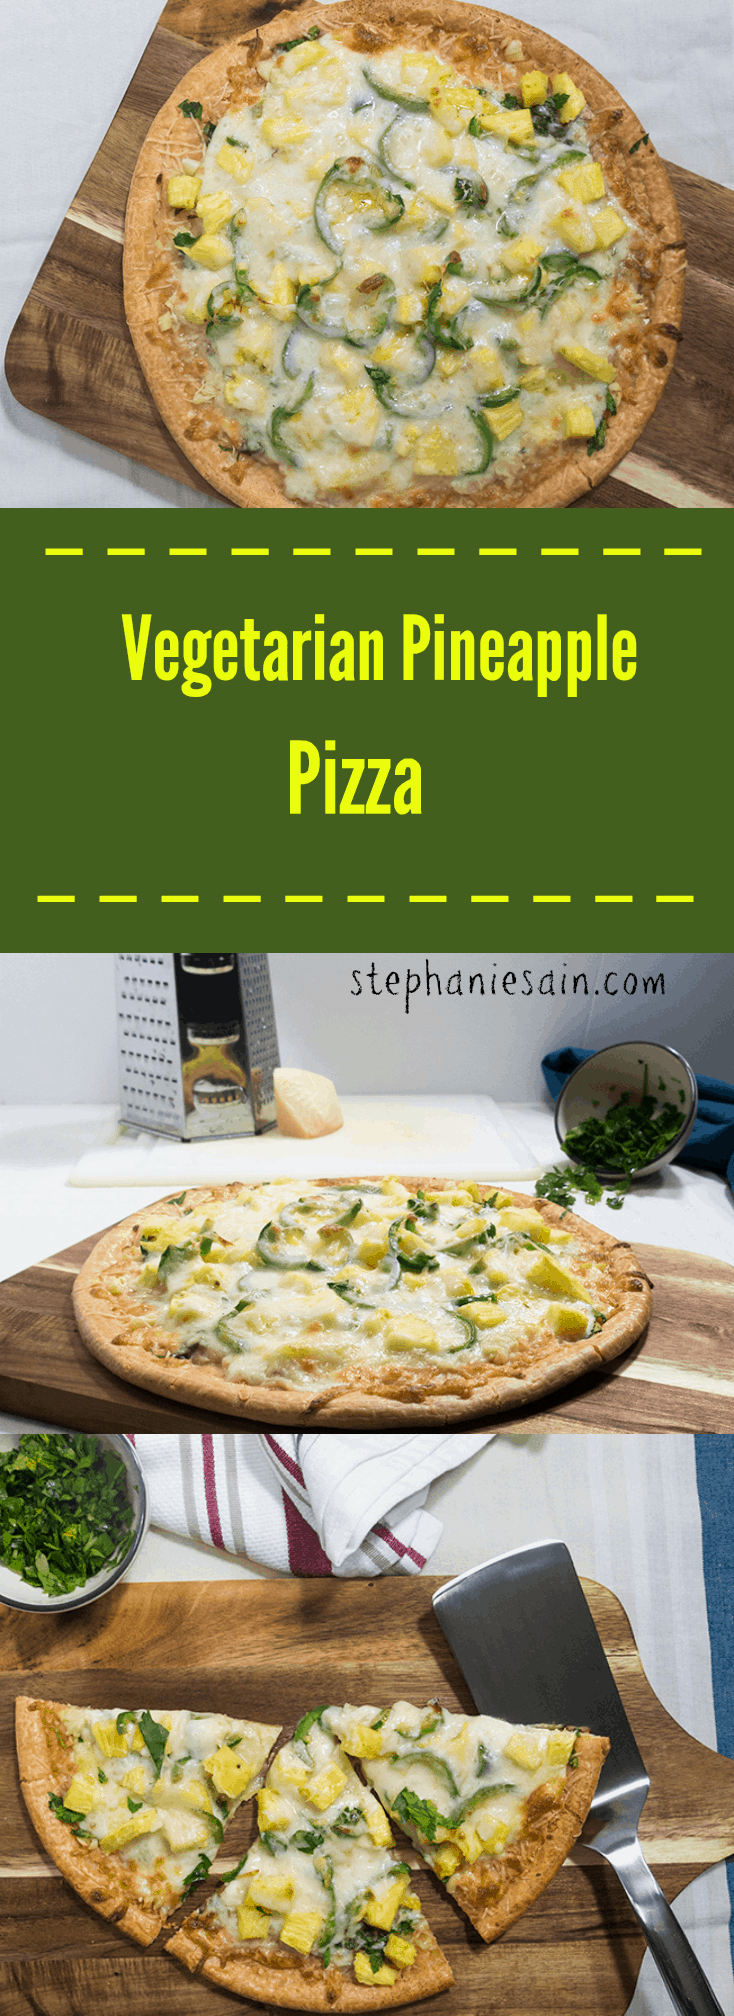 Vegetarian Pineapple Pizza is loaded with fresh pineapple and jalapenos that make for the perfect blend of sweet and savory. Gluten Free.